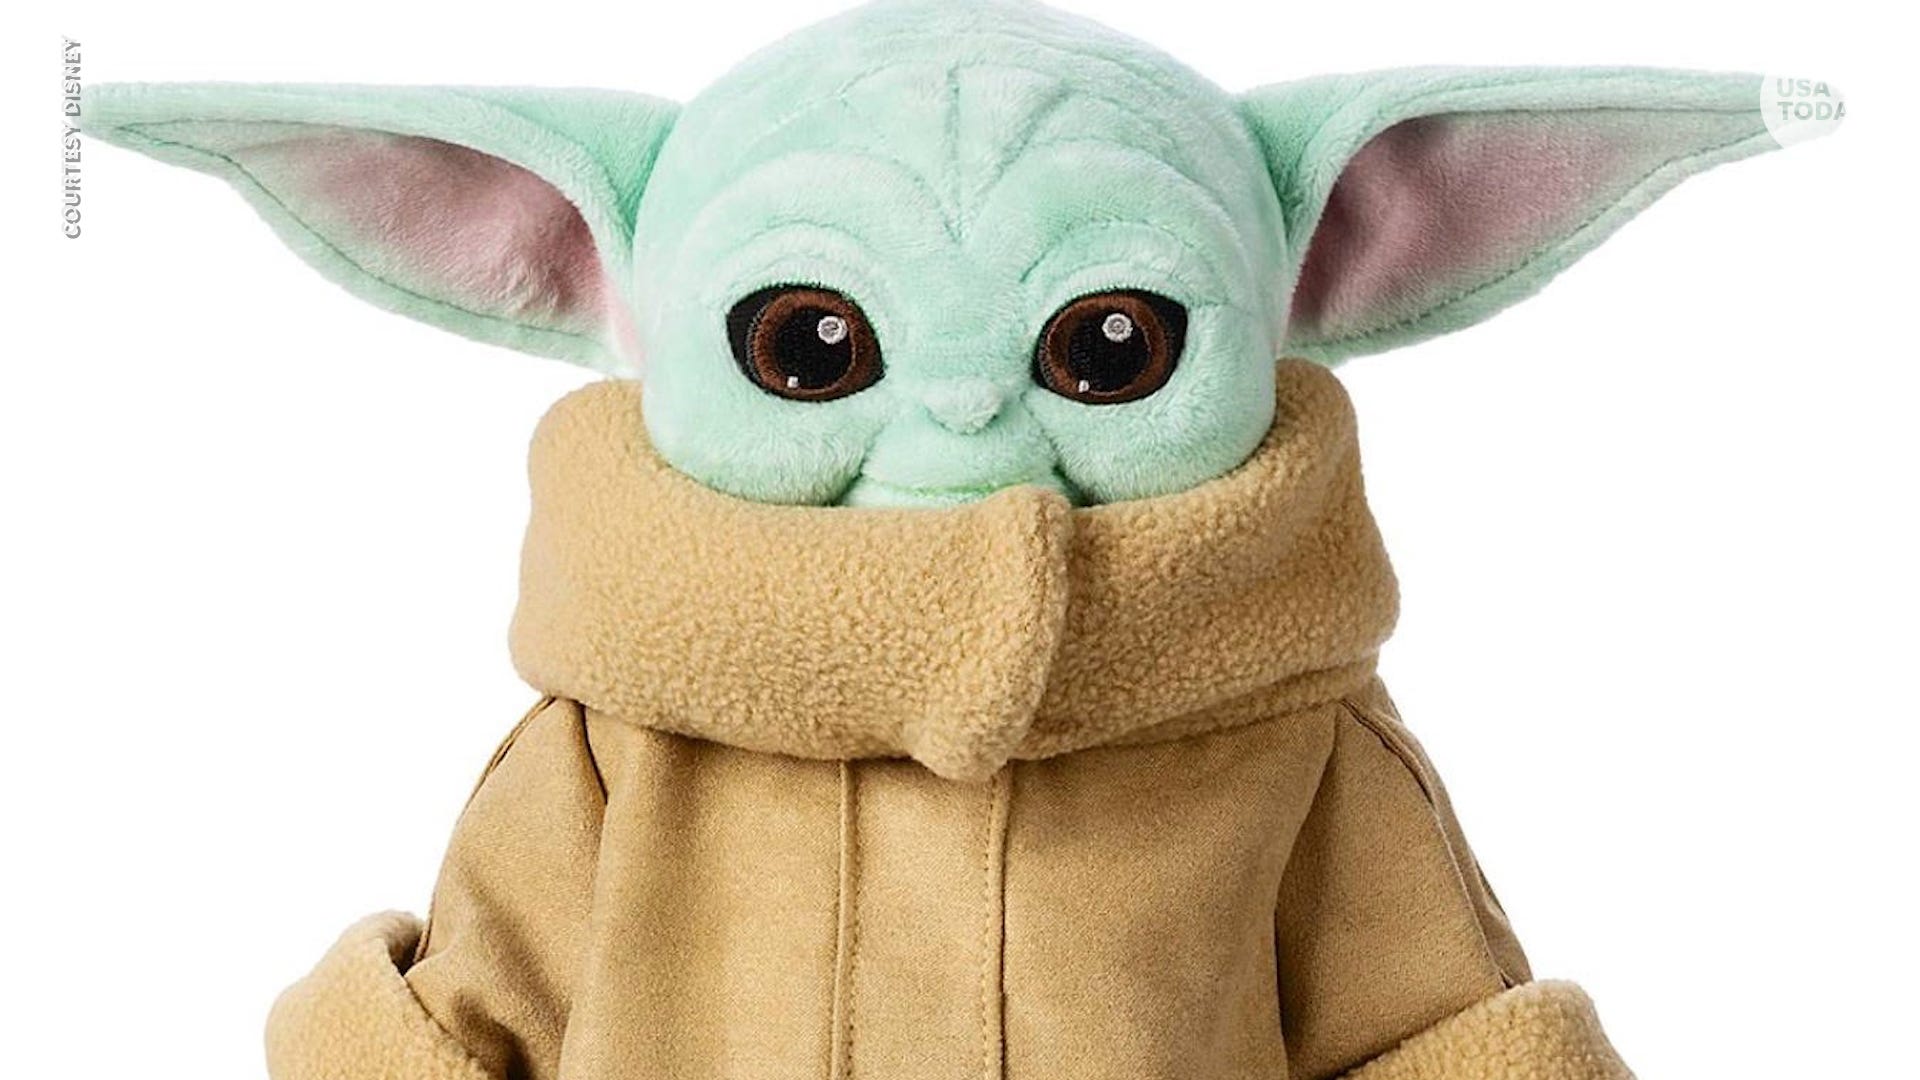 “Baby Yoda” is coming to Build-A-Bear Workshop